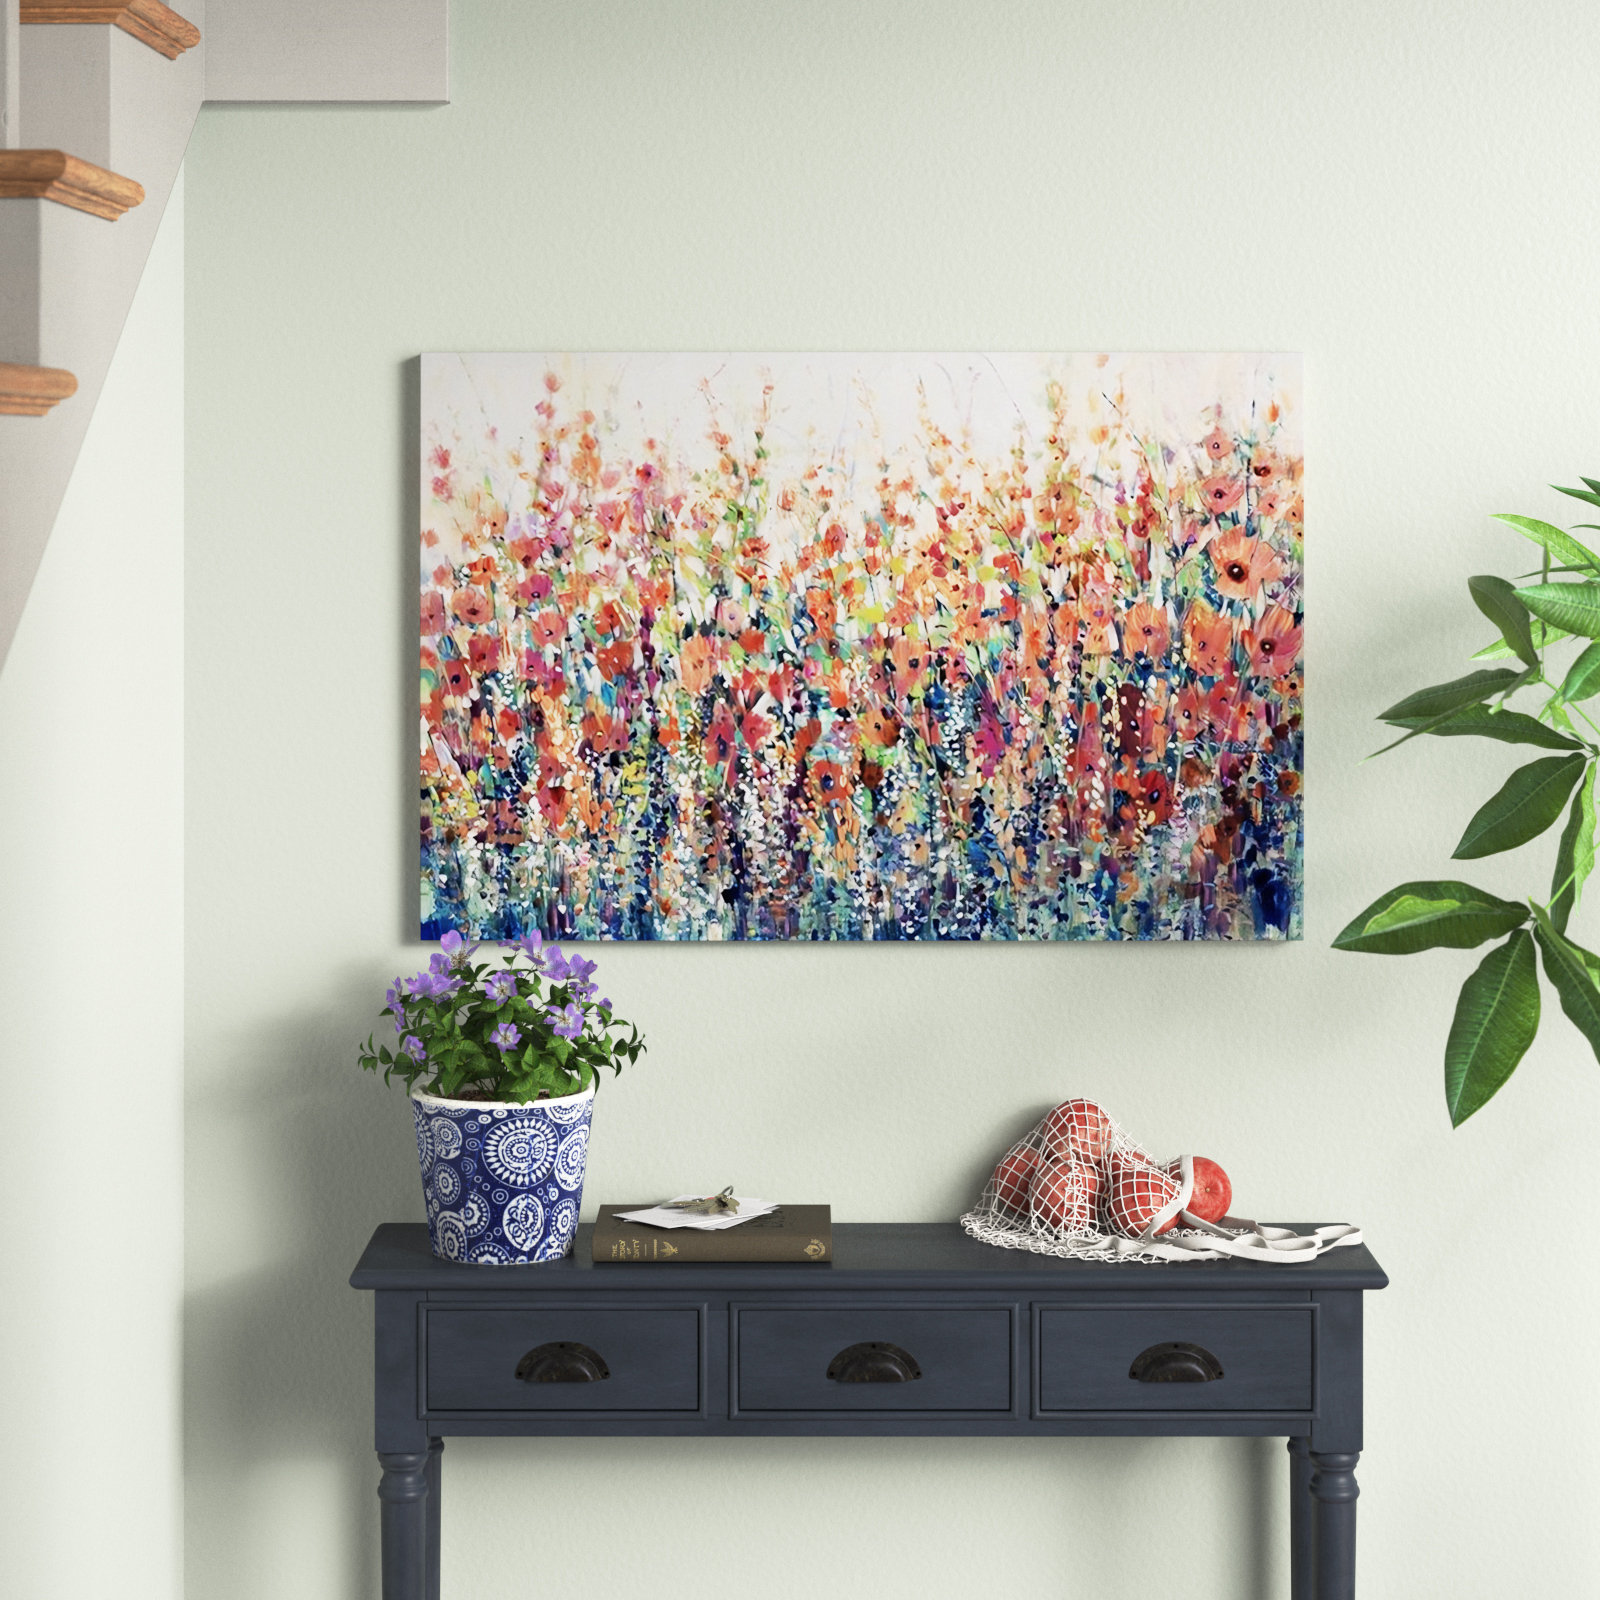 Flourish of Spring by Timothy O Toole - Painting Print on Canvas Andover Mills Format: Wrapped Canvas, Size: 24 H x 36 W